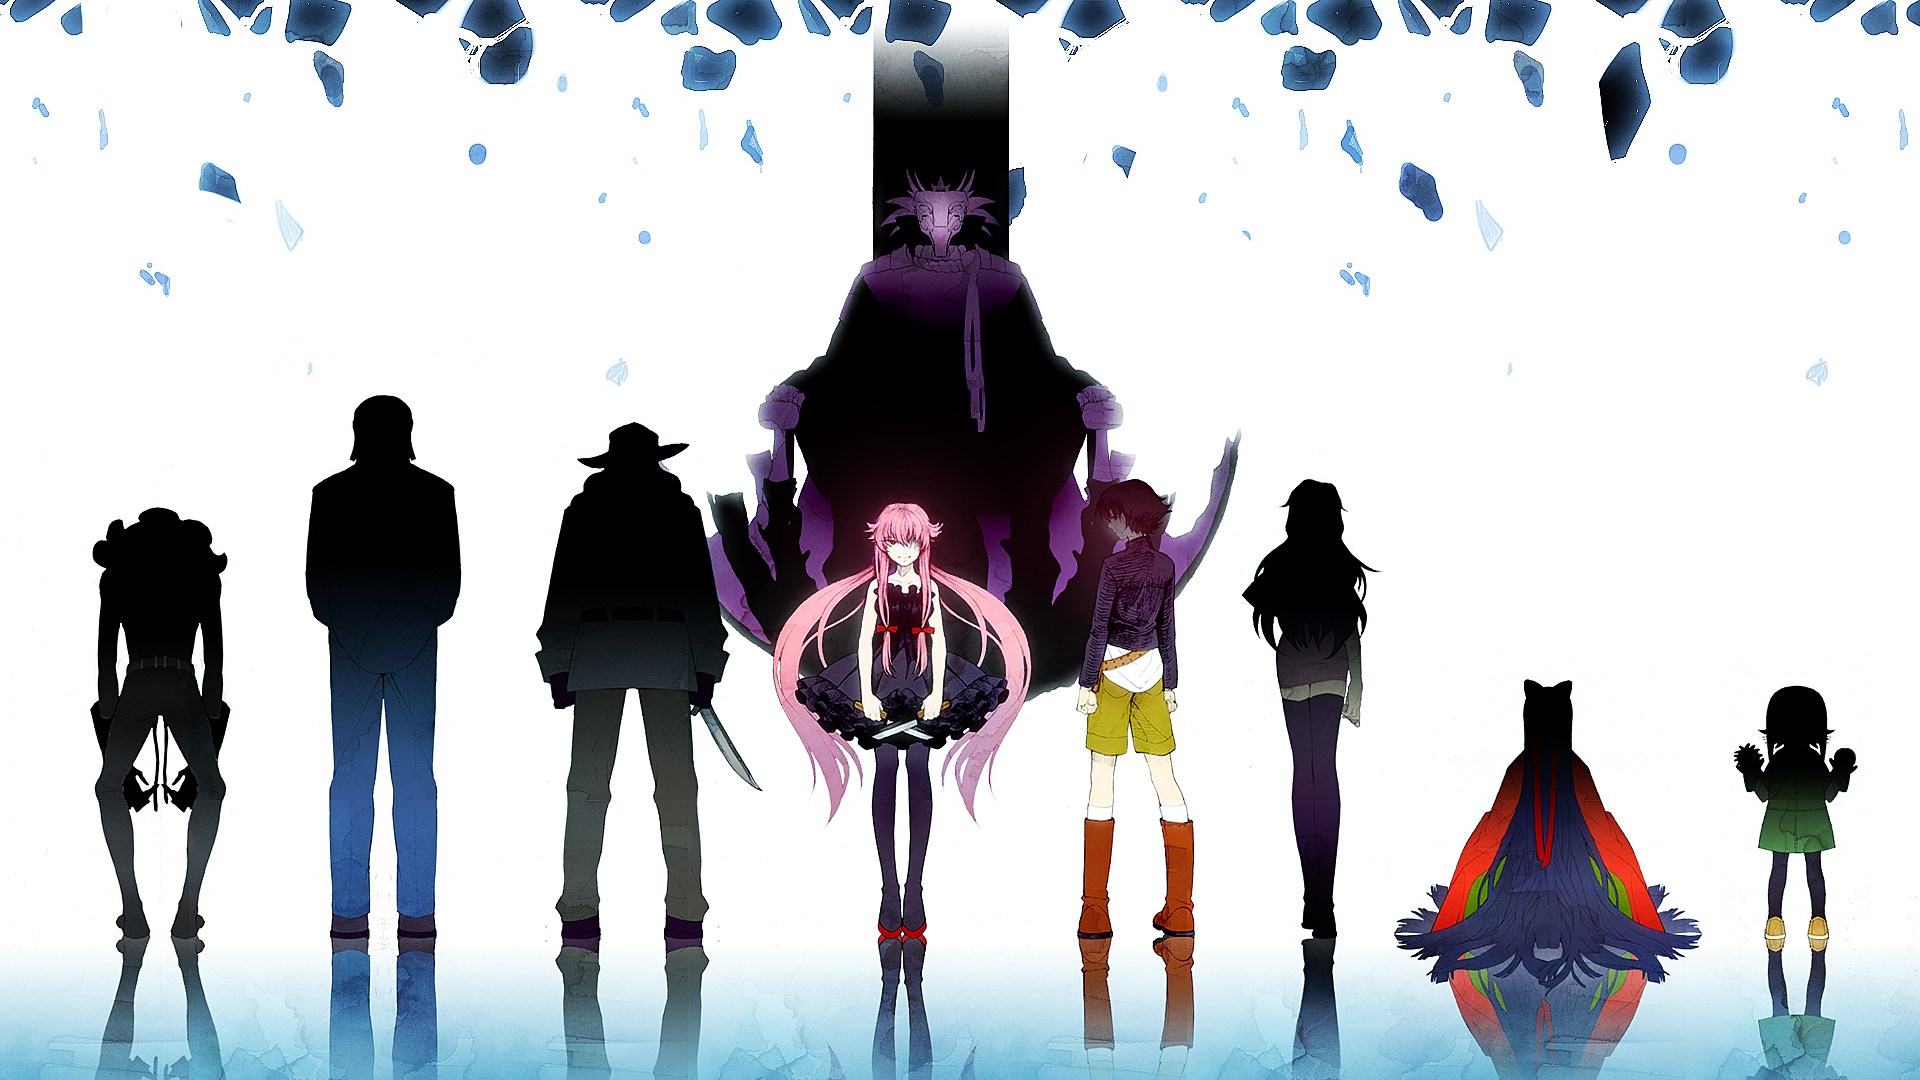 Mirai Nikki Redial - Dead End - Ending - 1080p [With Download] 